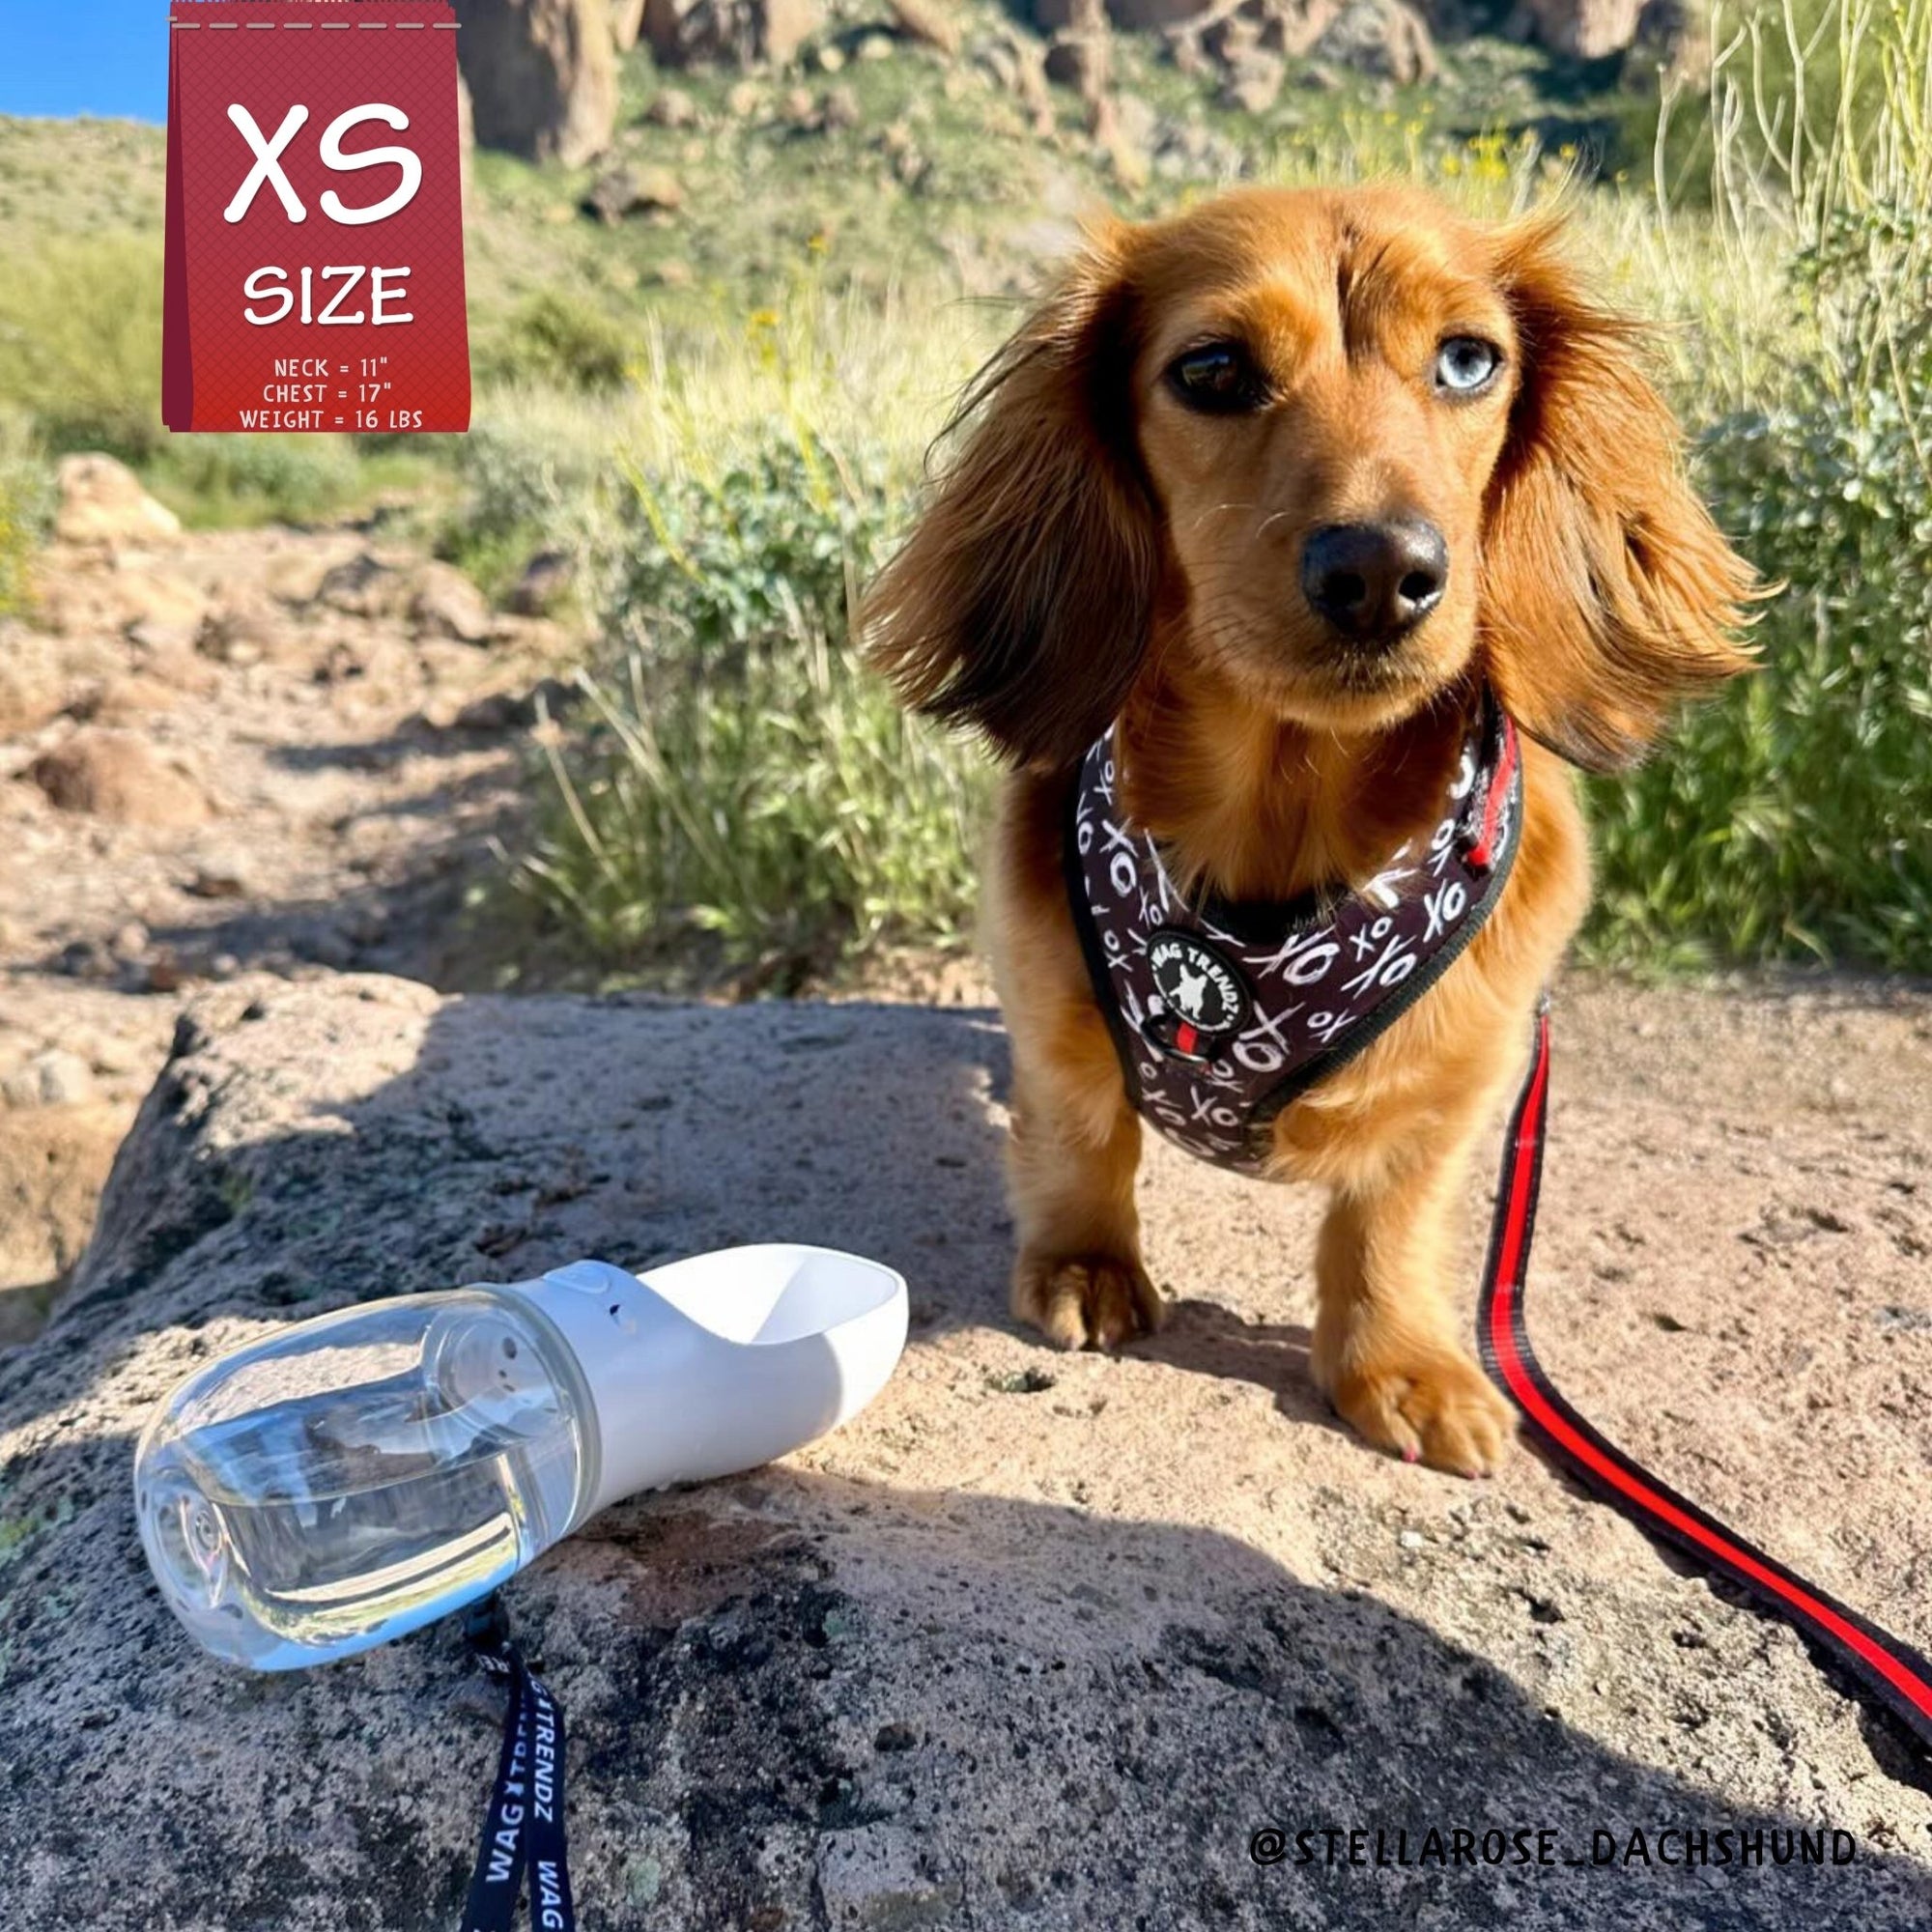 Dog Collar Harness and Leash Set - Longhair Dachshund wearing XS Dog Adjustable Harness in black and white XO's with bold Red accents with matching Dog Leash with portable dog water bottle  - on a rock with grass behind - Wag Trendz